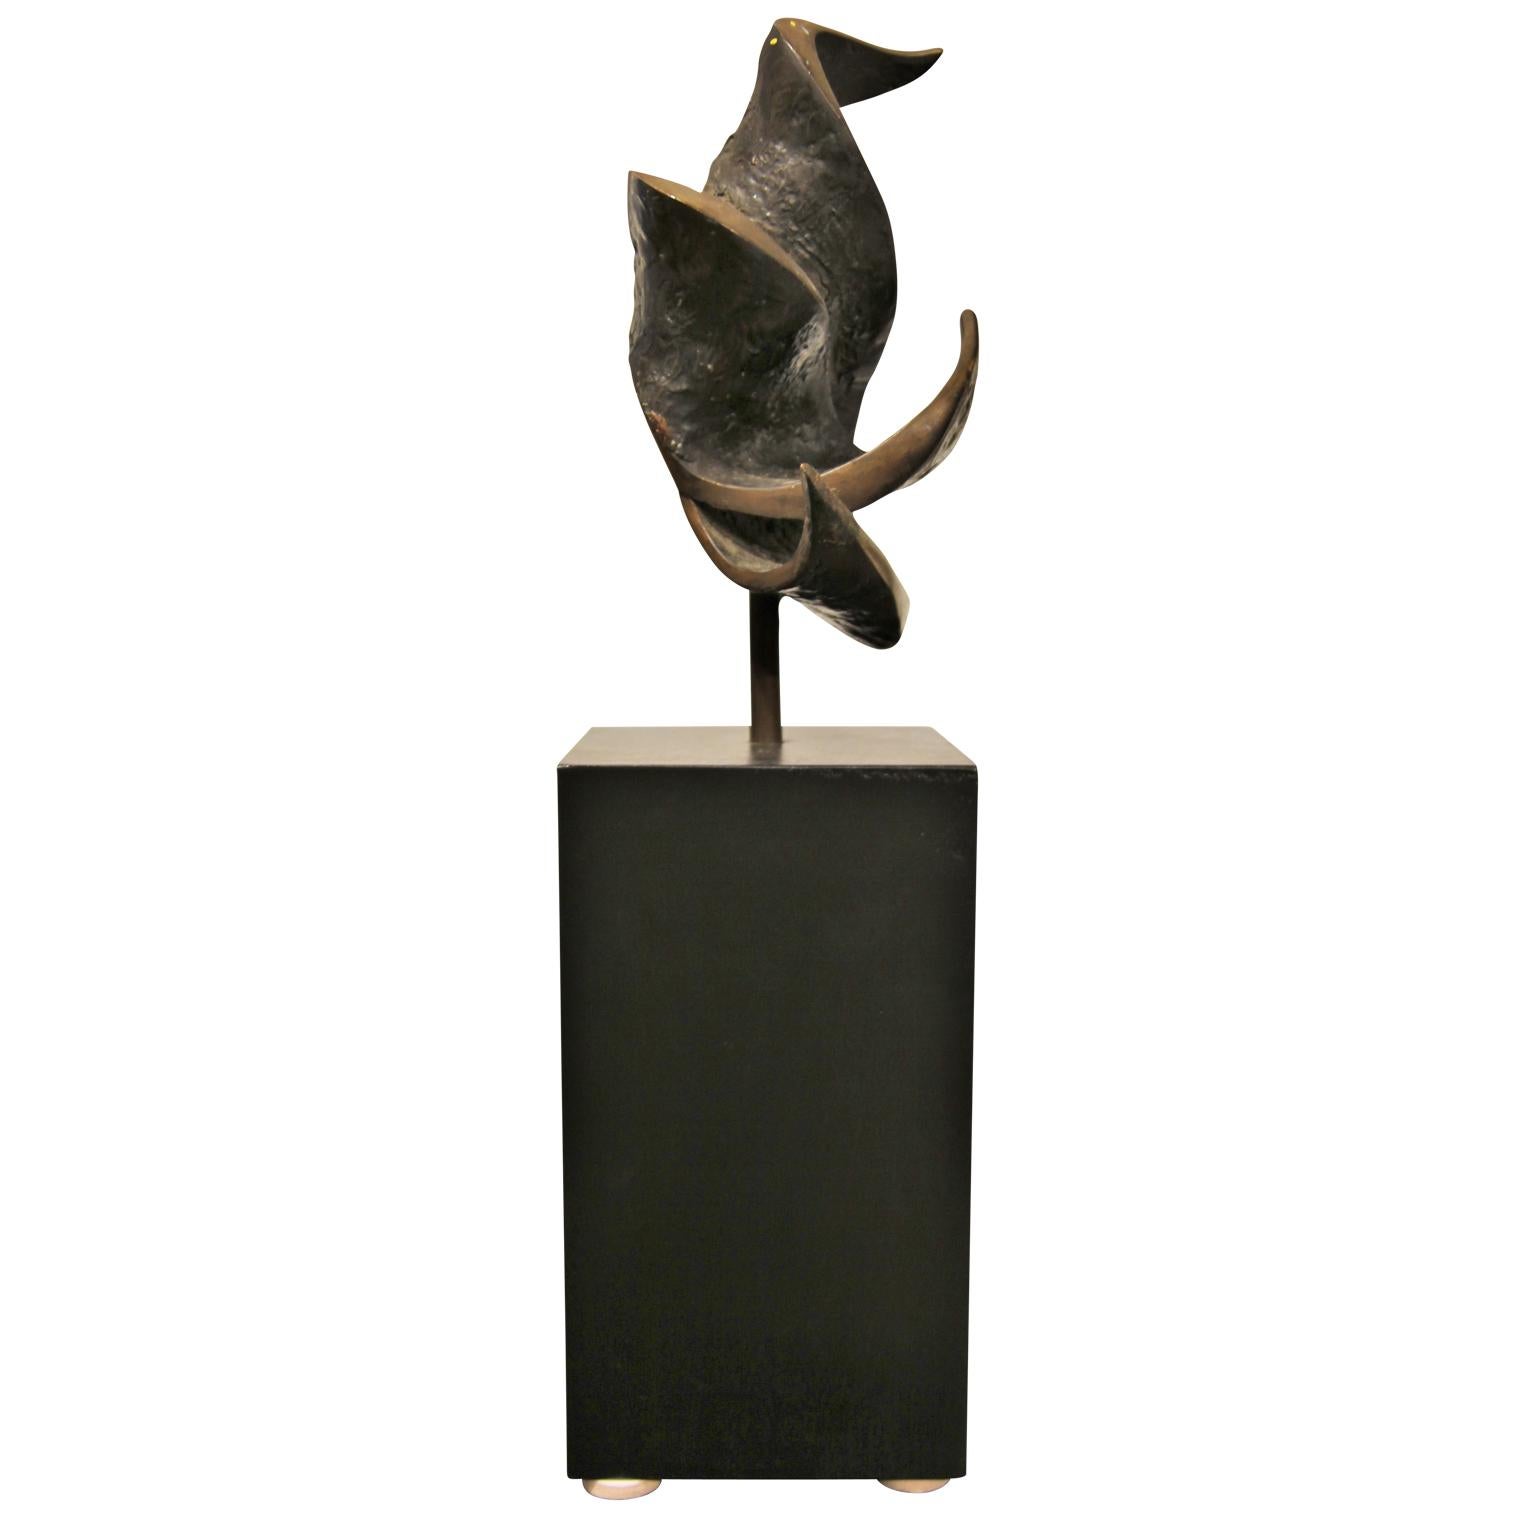 W. R. Stevenson's abstract bronze sculpture that stands on a sleek black wooden base. This piece is an excellent example of W. R. Stevenson's work as a sculptor. 

Artist Biography: William Robert Stevenson was born in 20 May 1925 in Eugene, Oregon.